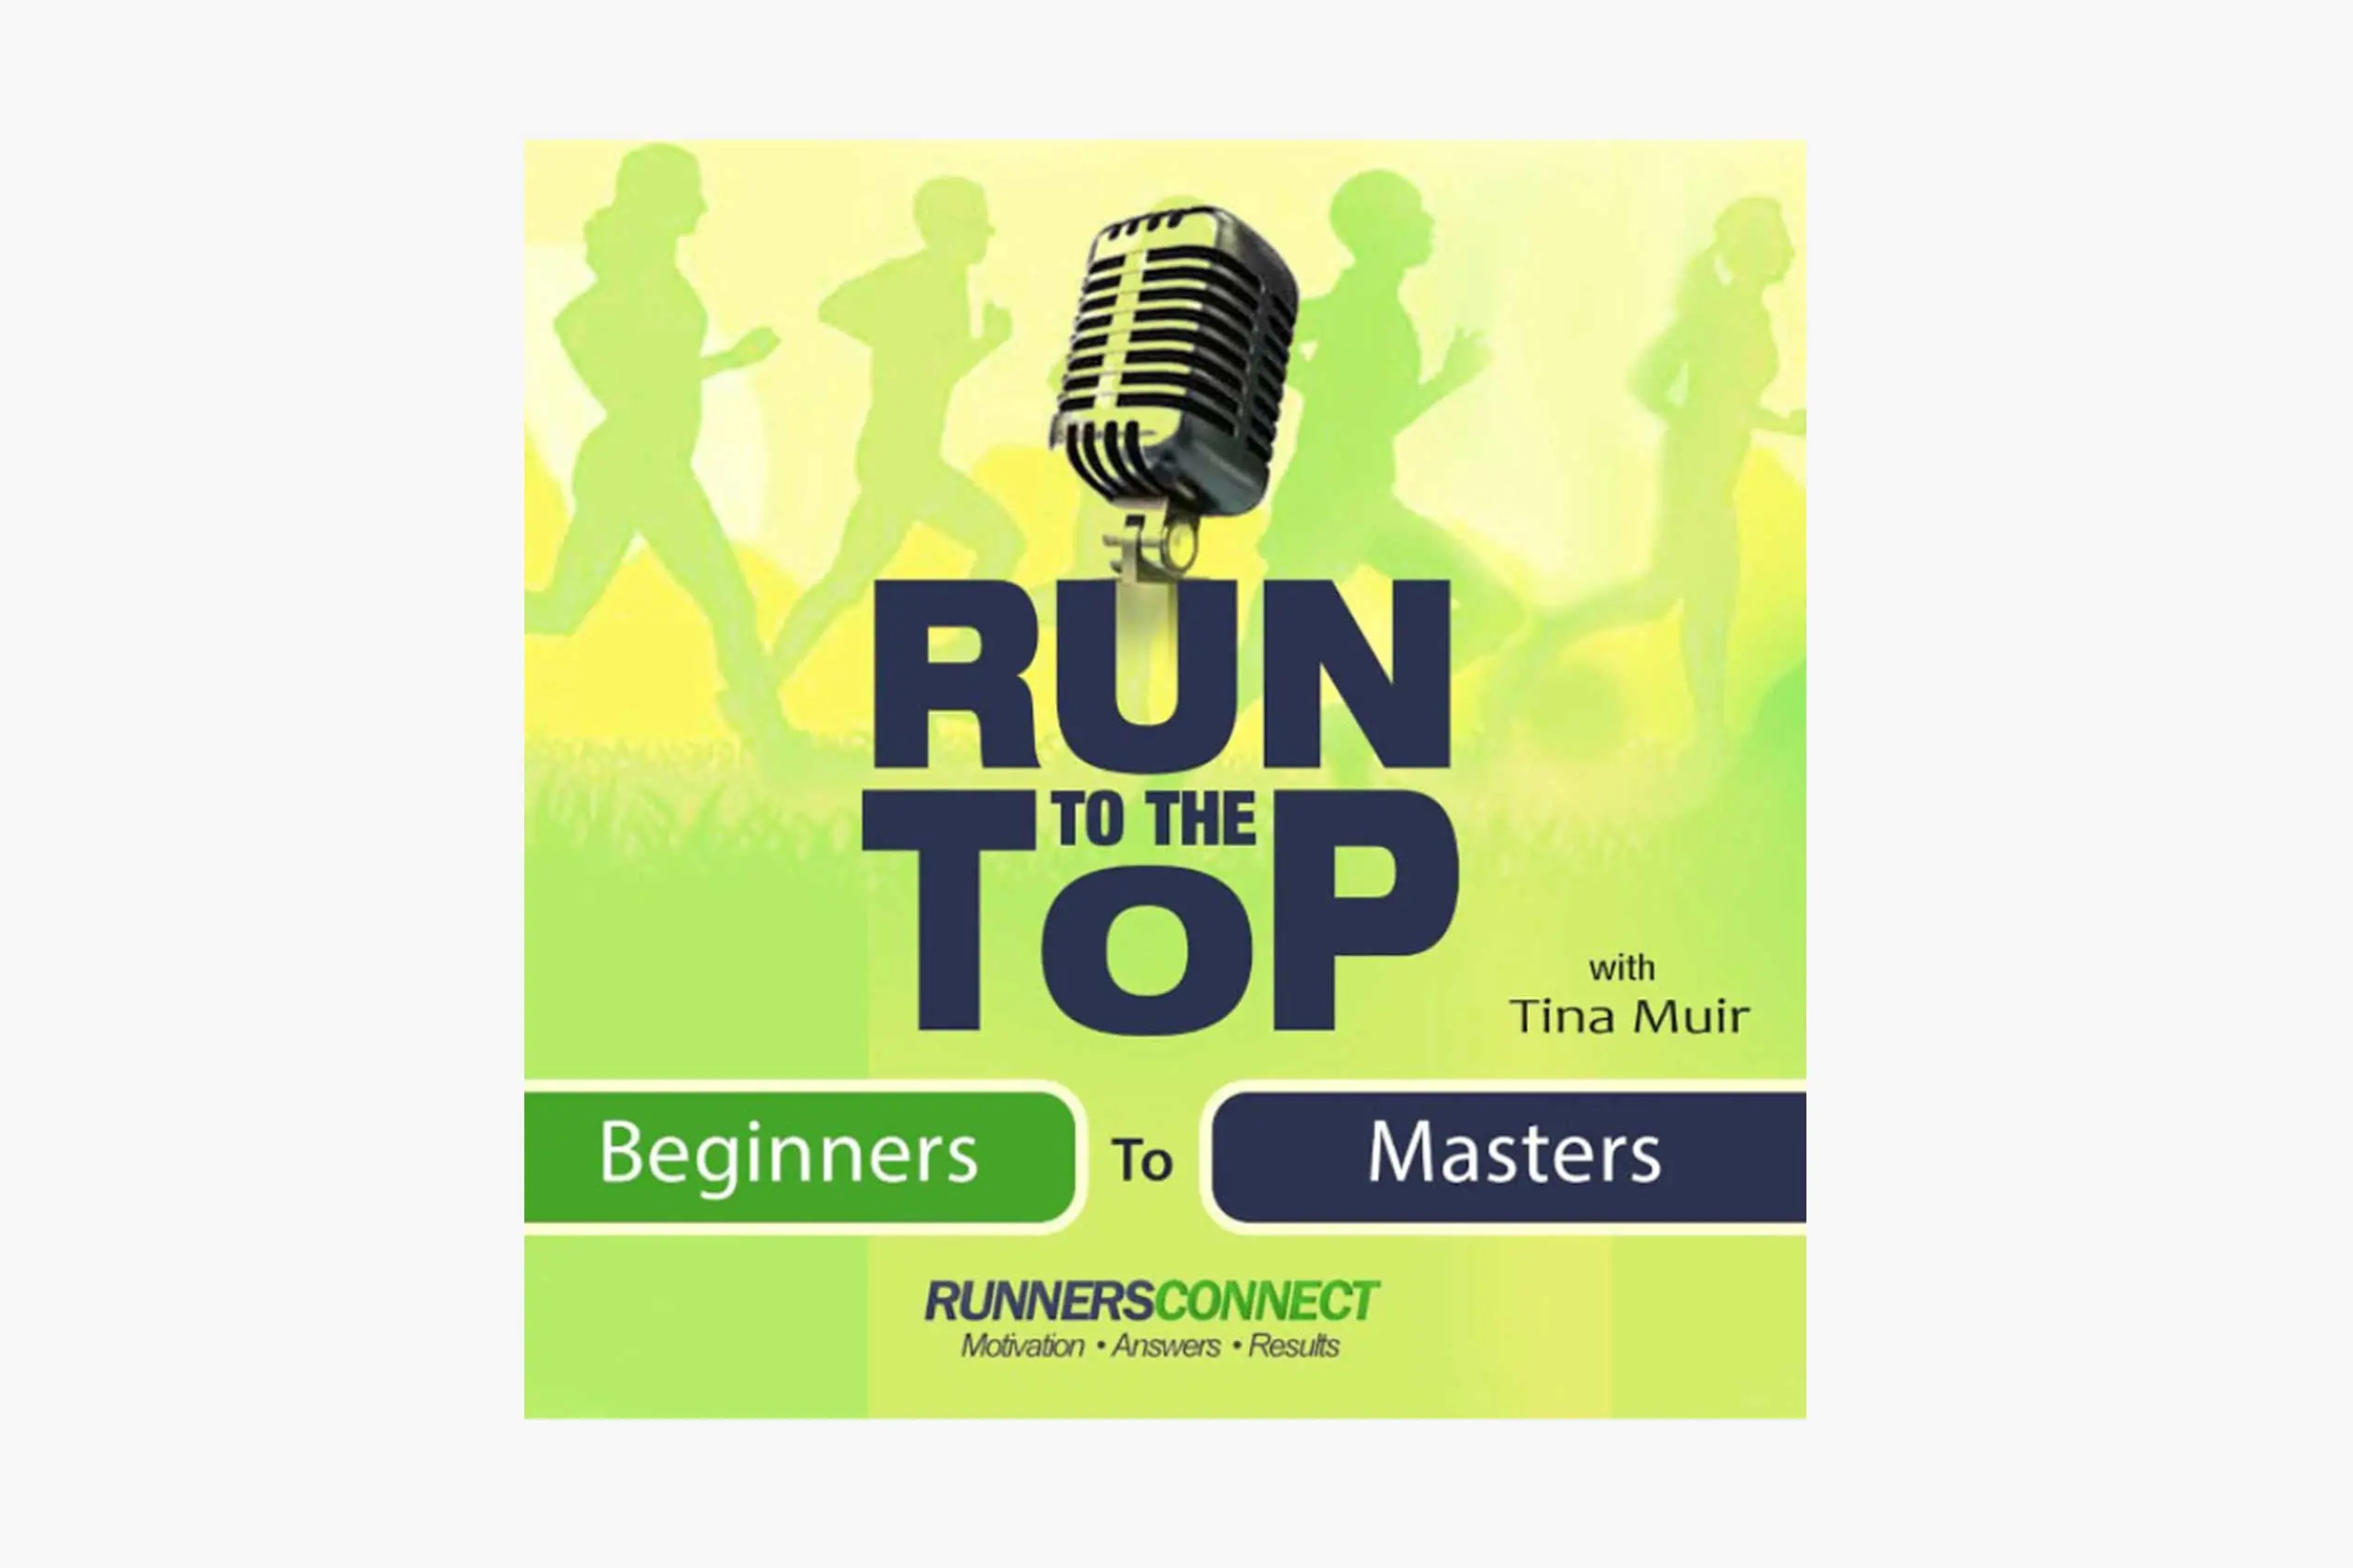 The Best Running Gear for Beginners (contains podcast): We talk